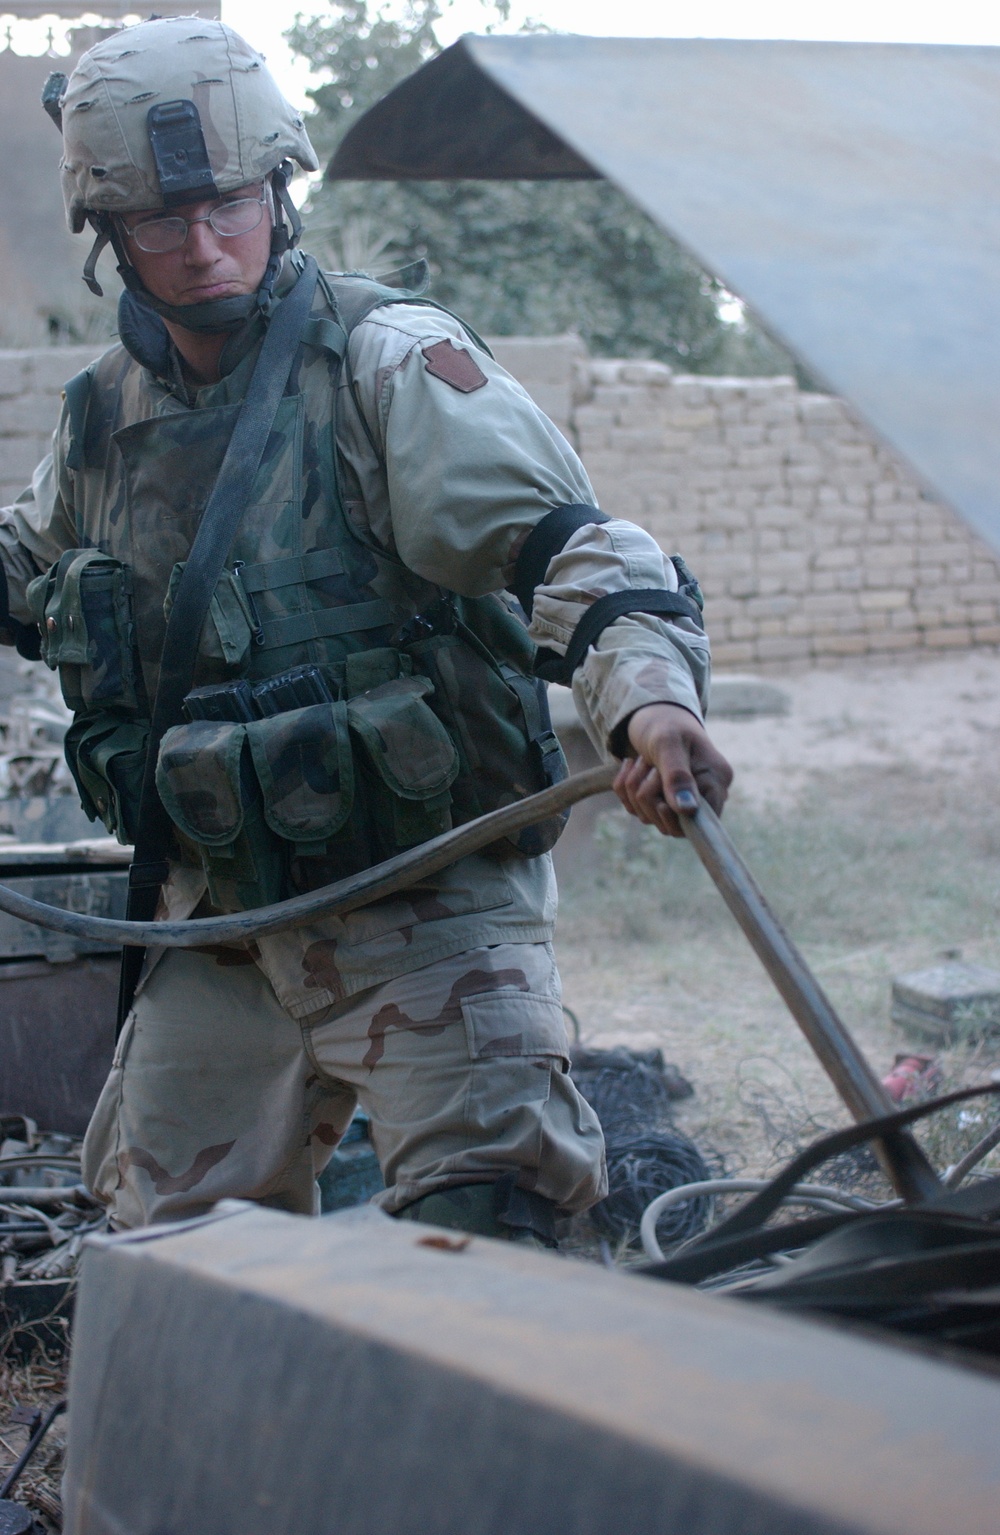 Spc. Ryan Kocher pulls electrical wires out of a vehicle